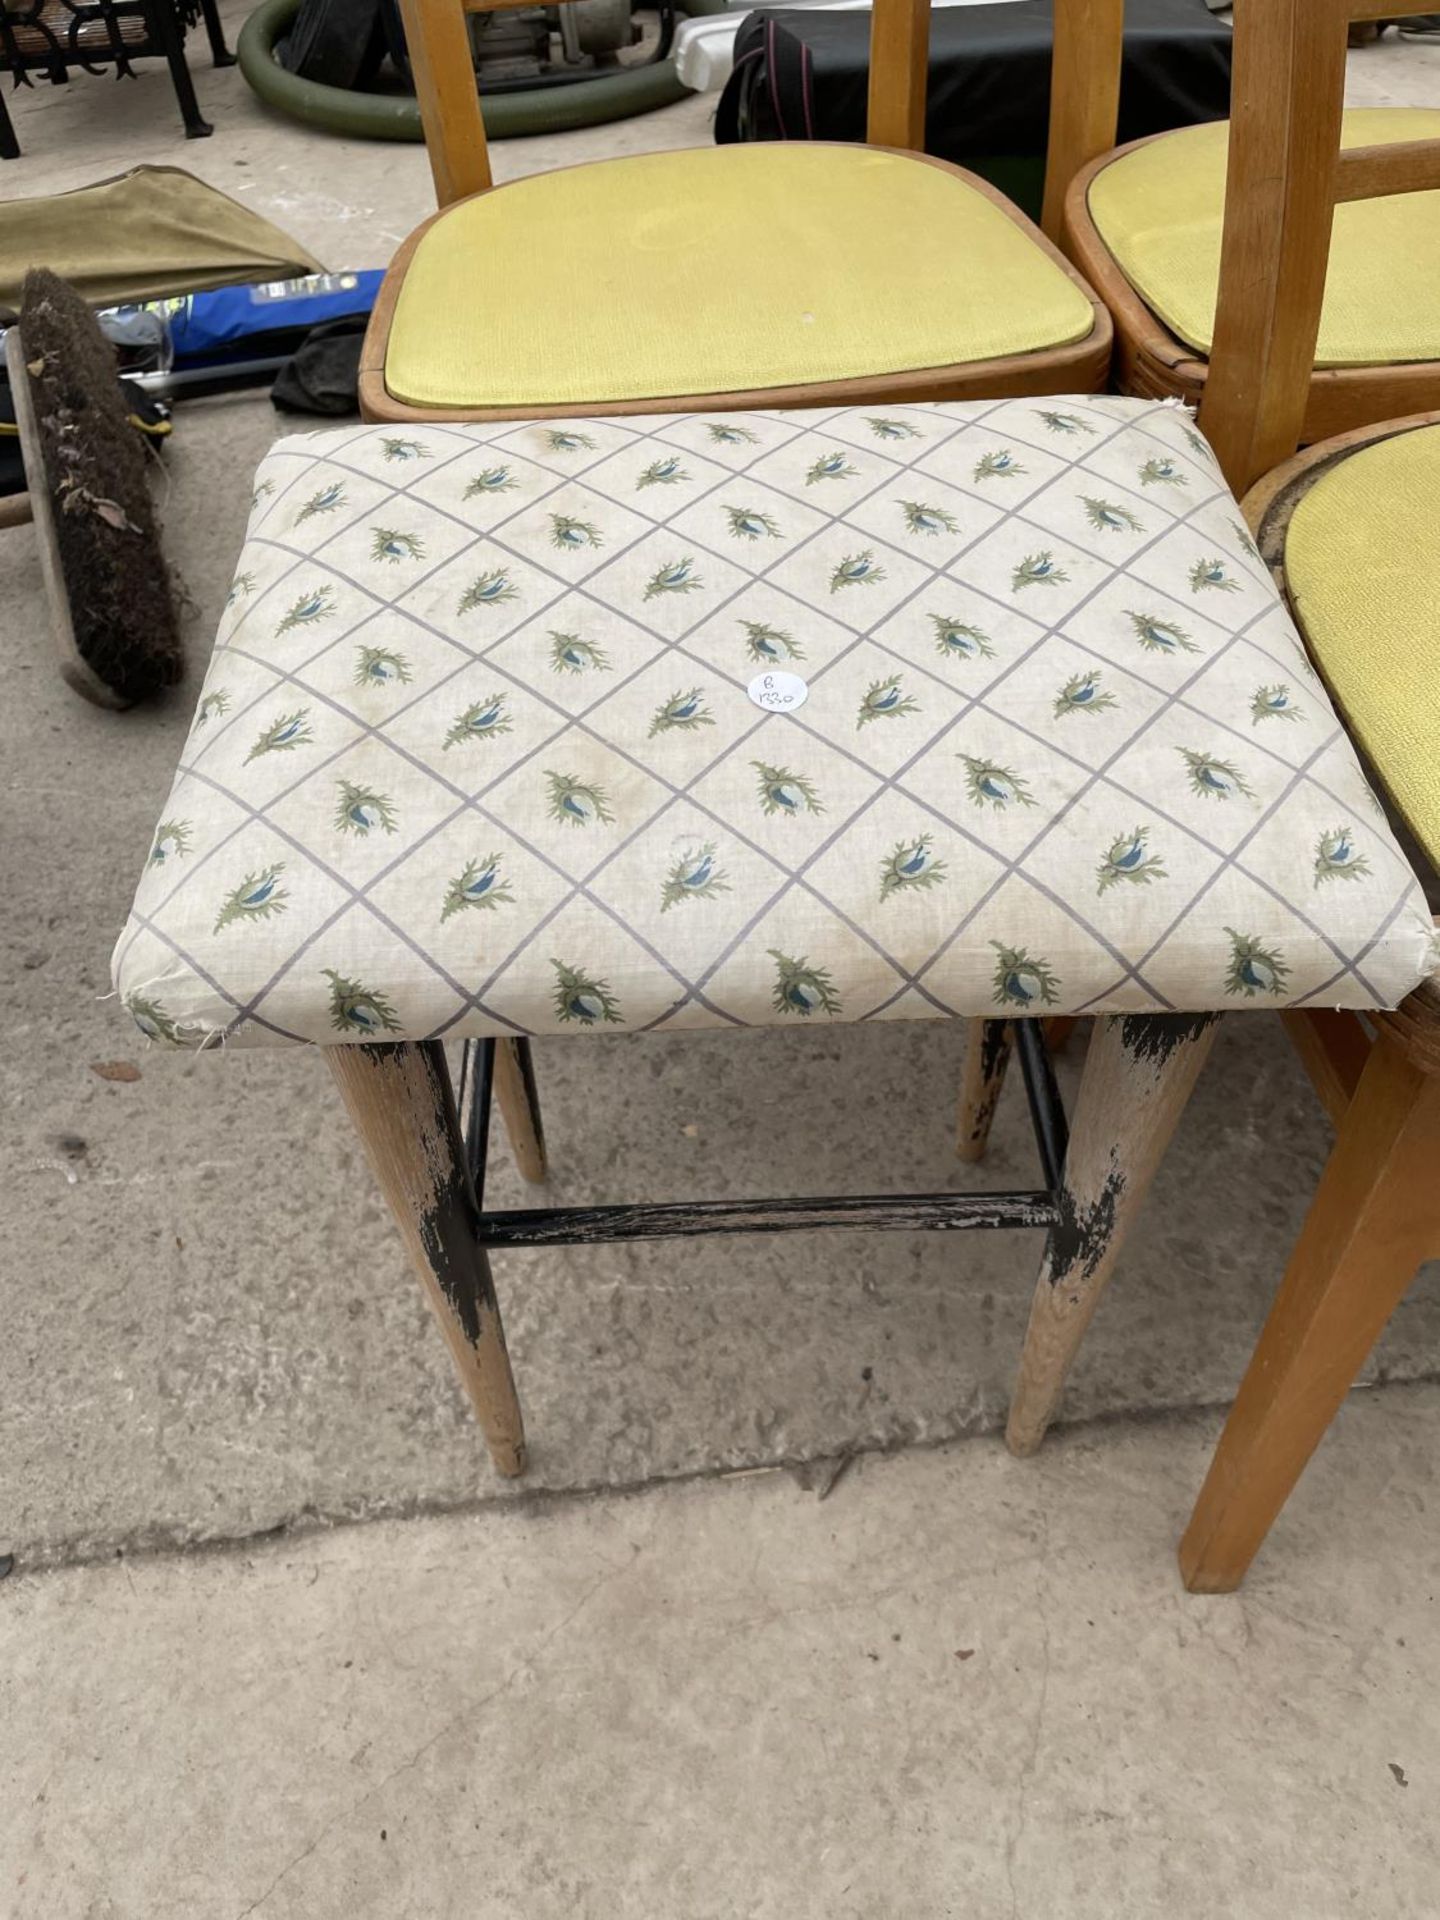 THREE MID 20TH CENTURY KITCHEN CHAIRS AND A STOOL - Image 2 of 4